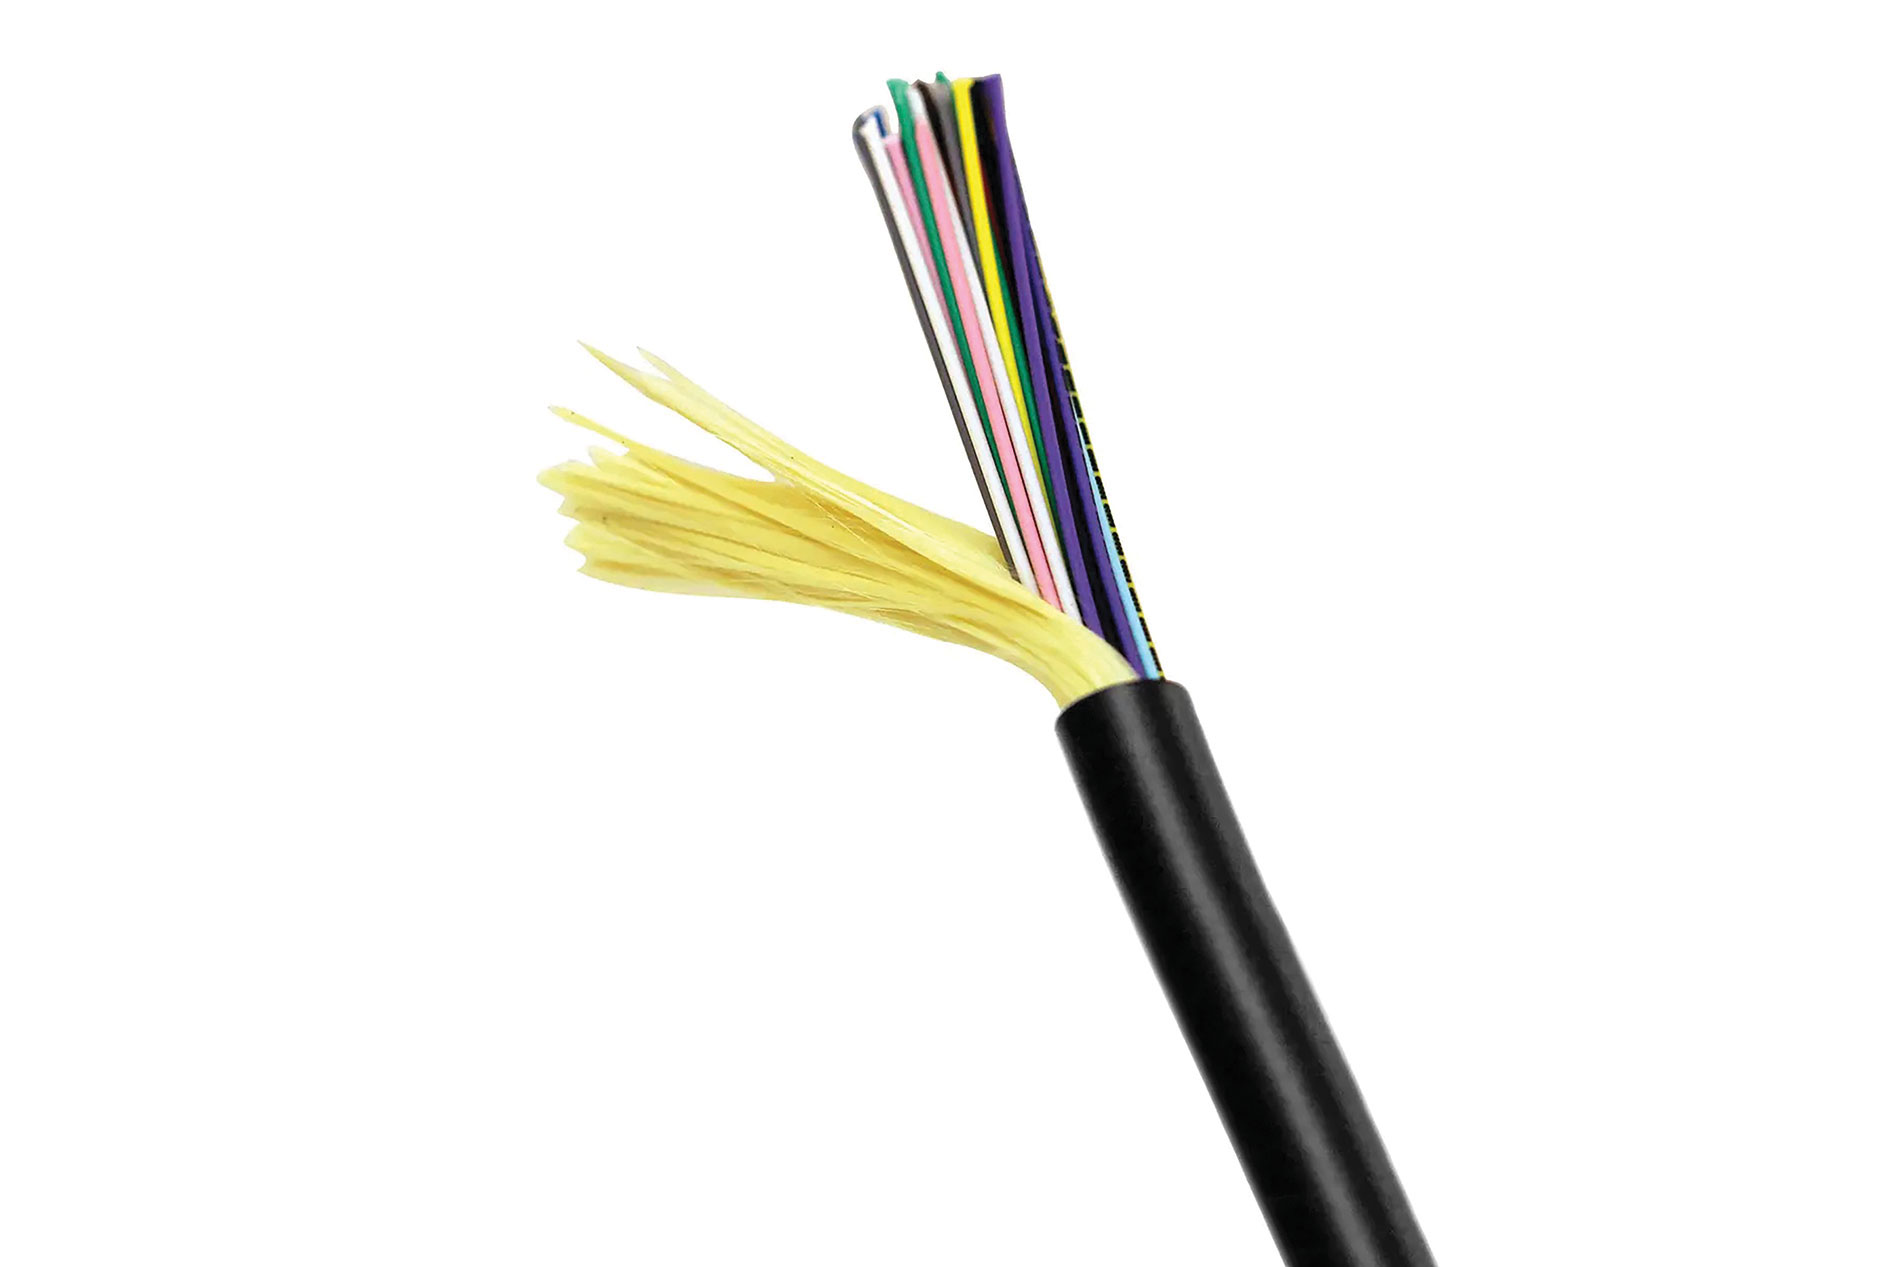 Black cable with multicolored ends. Image by Hubbell Premise Wiring.